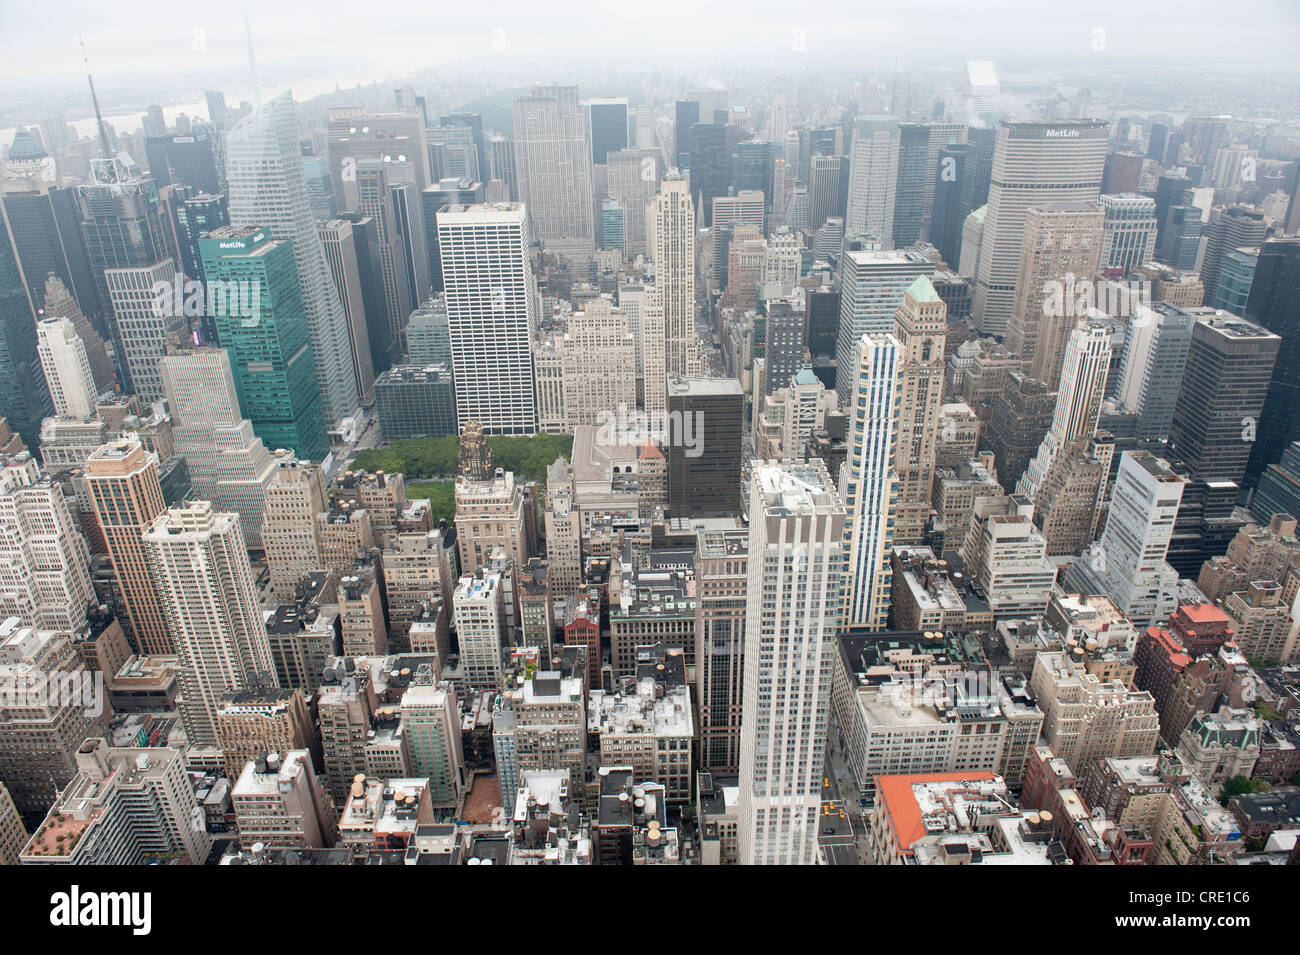 Metropolis, sea of houses, view from the Empire State Building to the skyscrapers of Midtown in fog, skyscrapers, Manhattan Stock Photo